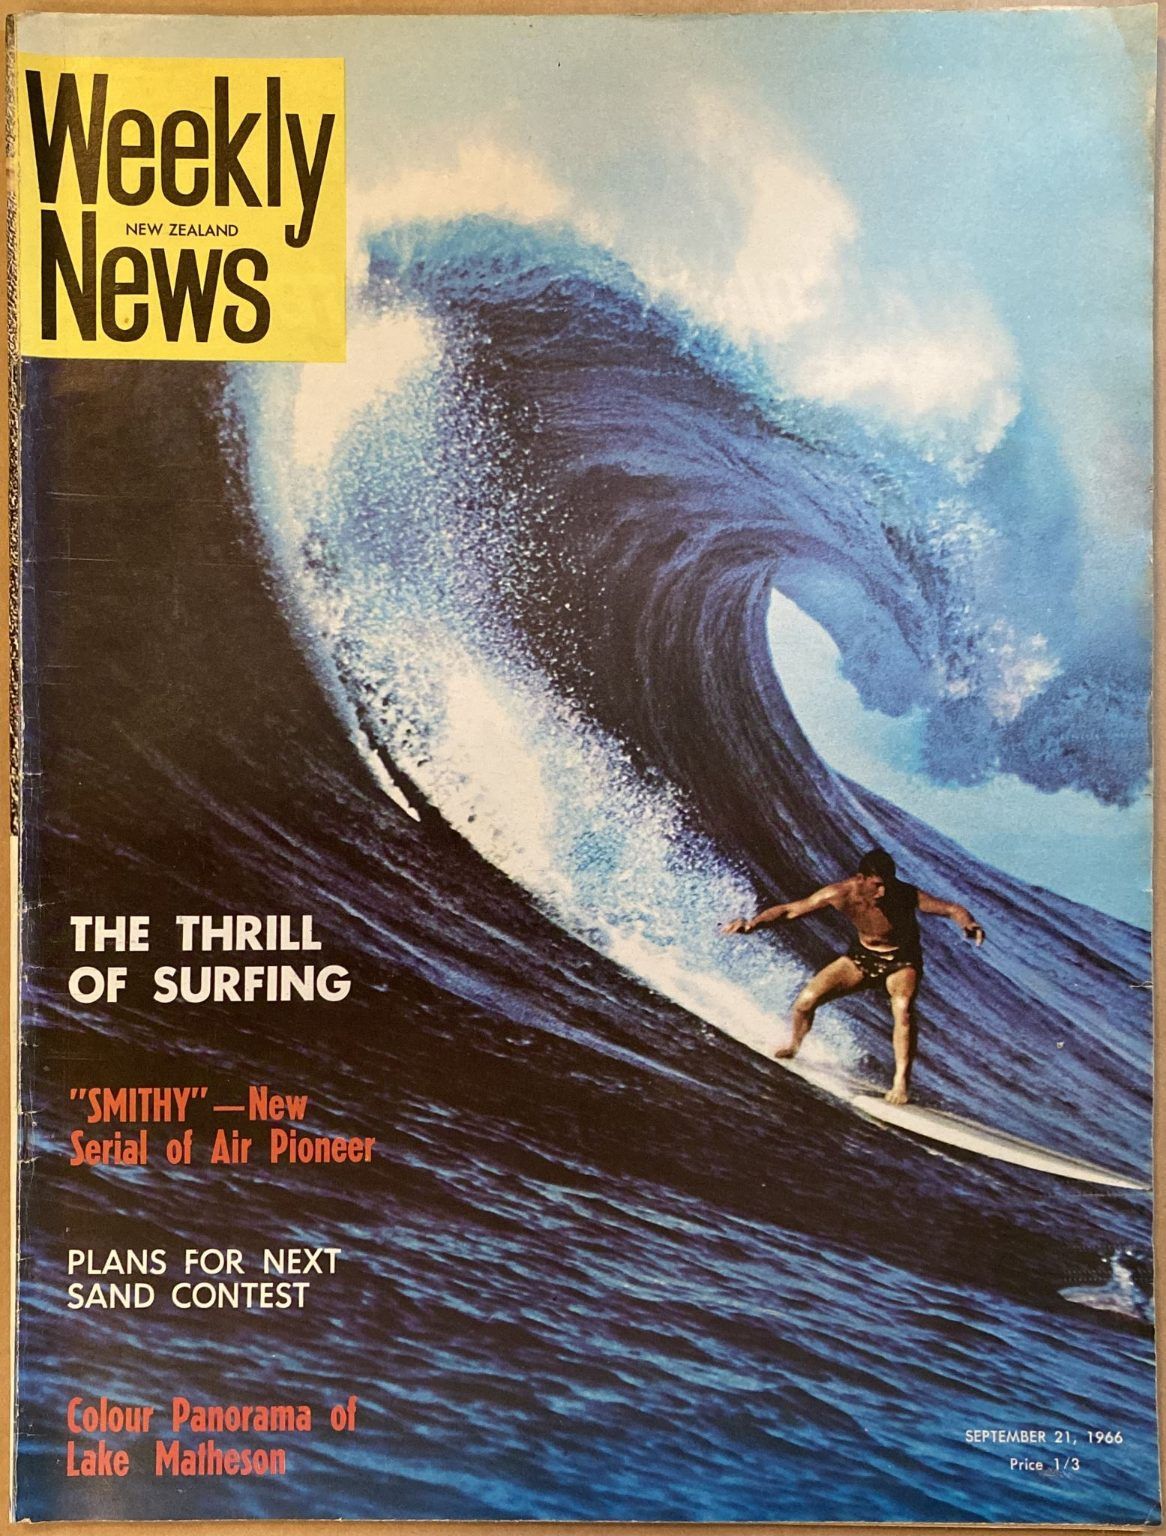 OLD NEWSPAPER: New Zealand Weekly News, No. 5365, 21 September 1966